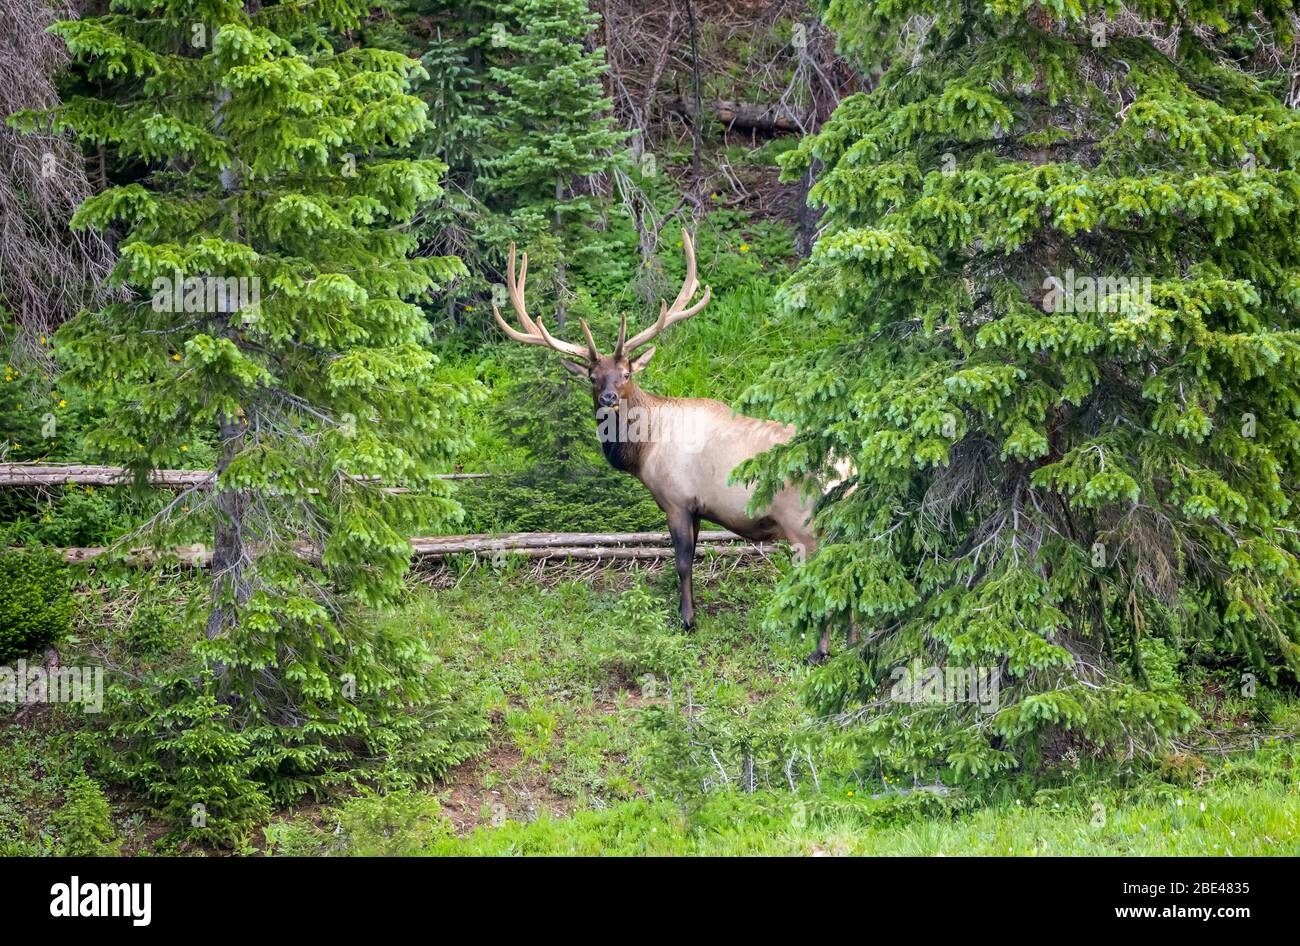 Bull elk (Cervus canadensis) standing in a lush forest; Estes Park, Colorado, United States of America Stock Photo